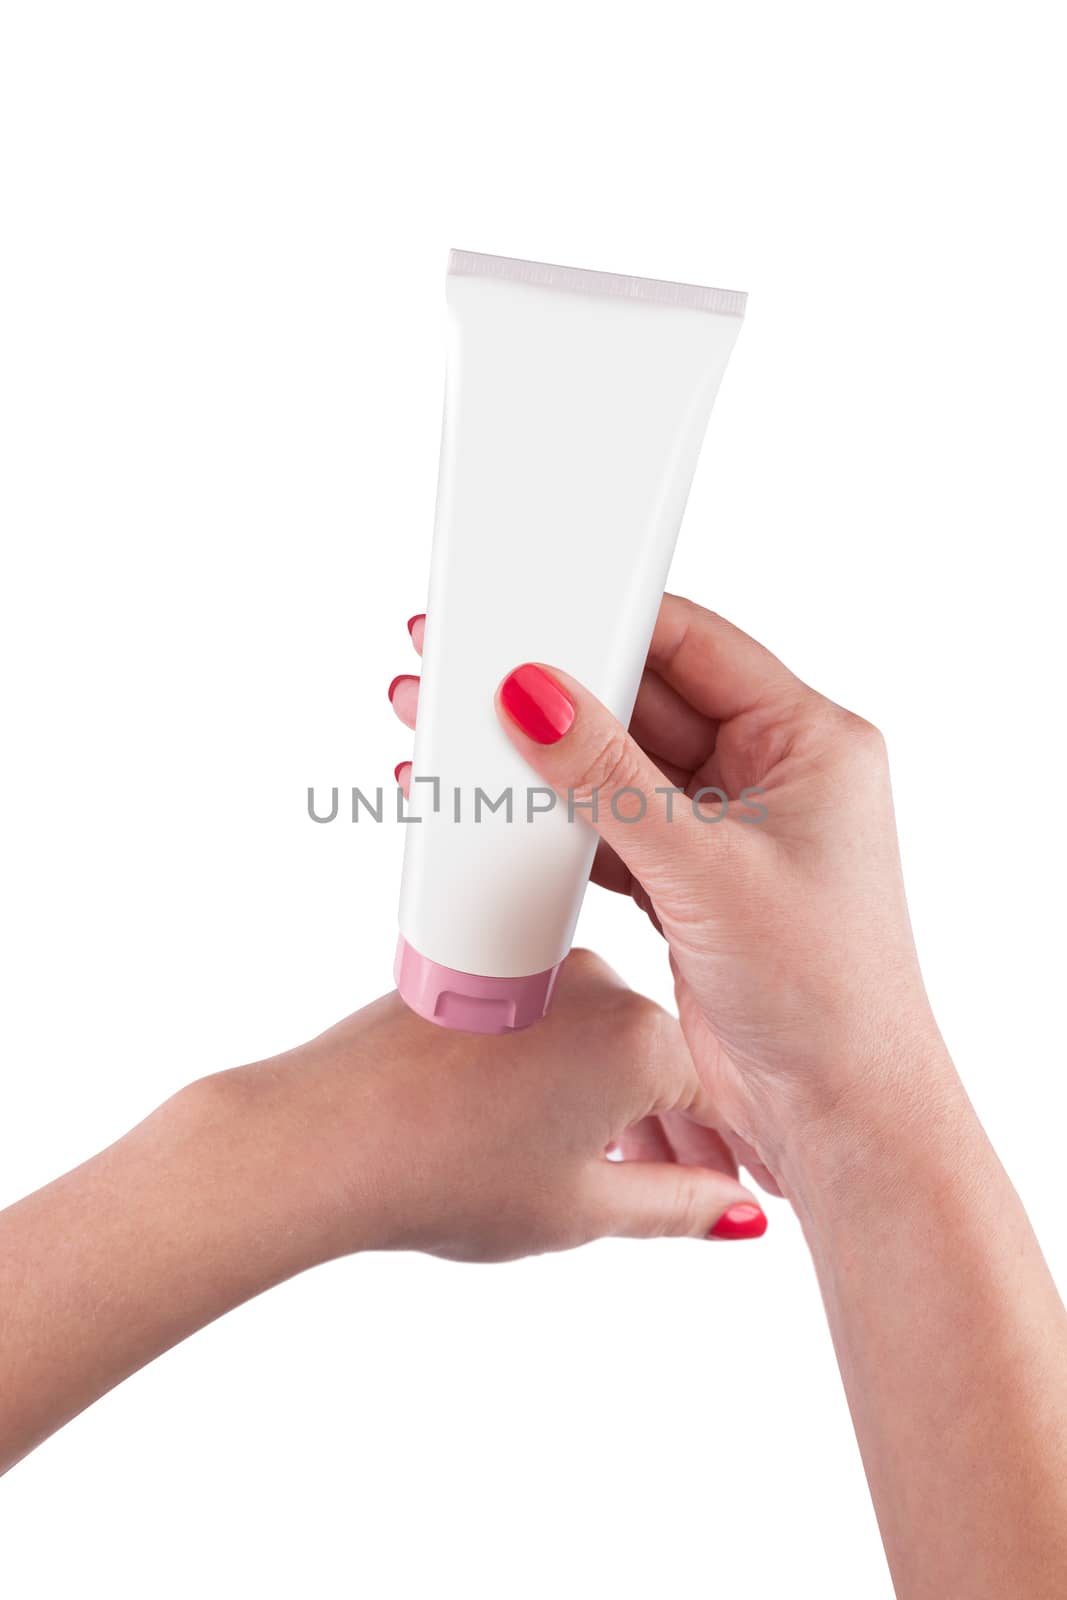 Hand holding cream tube isolated on white background. With clipping path